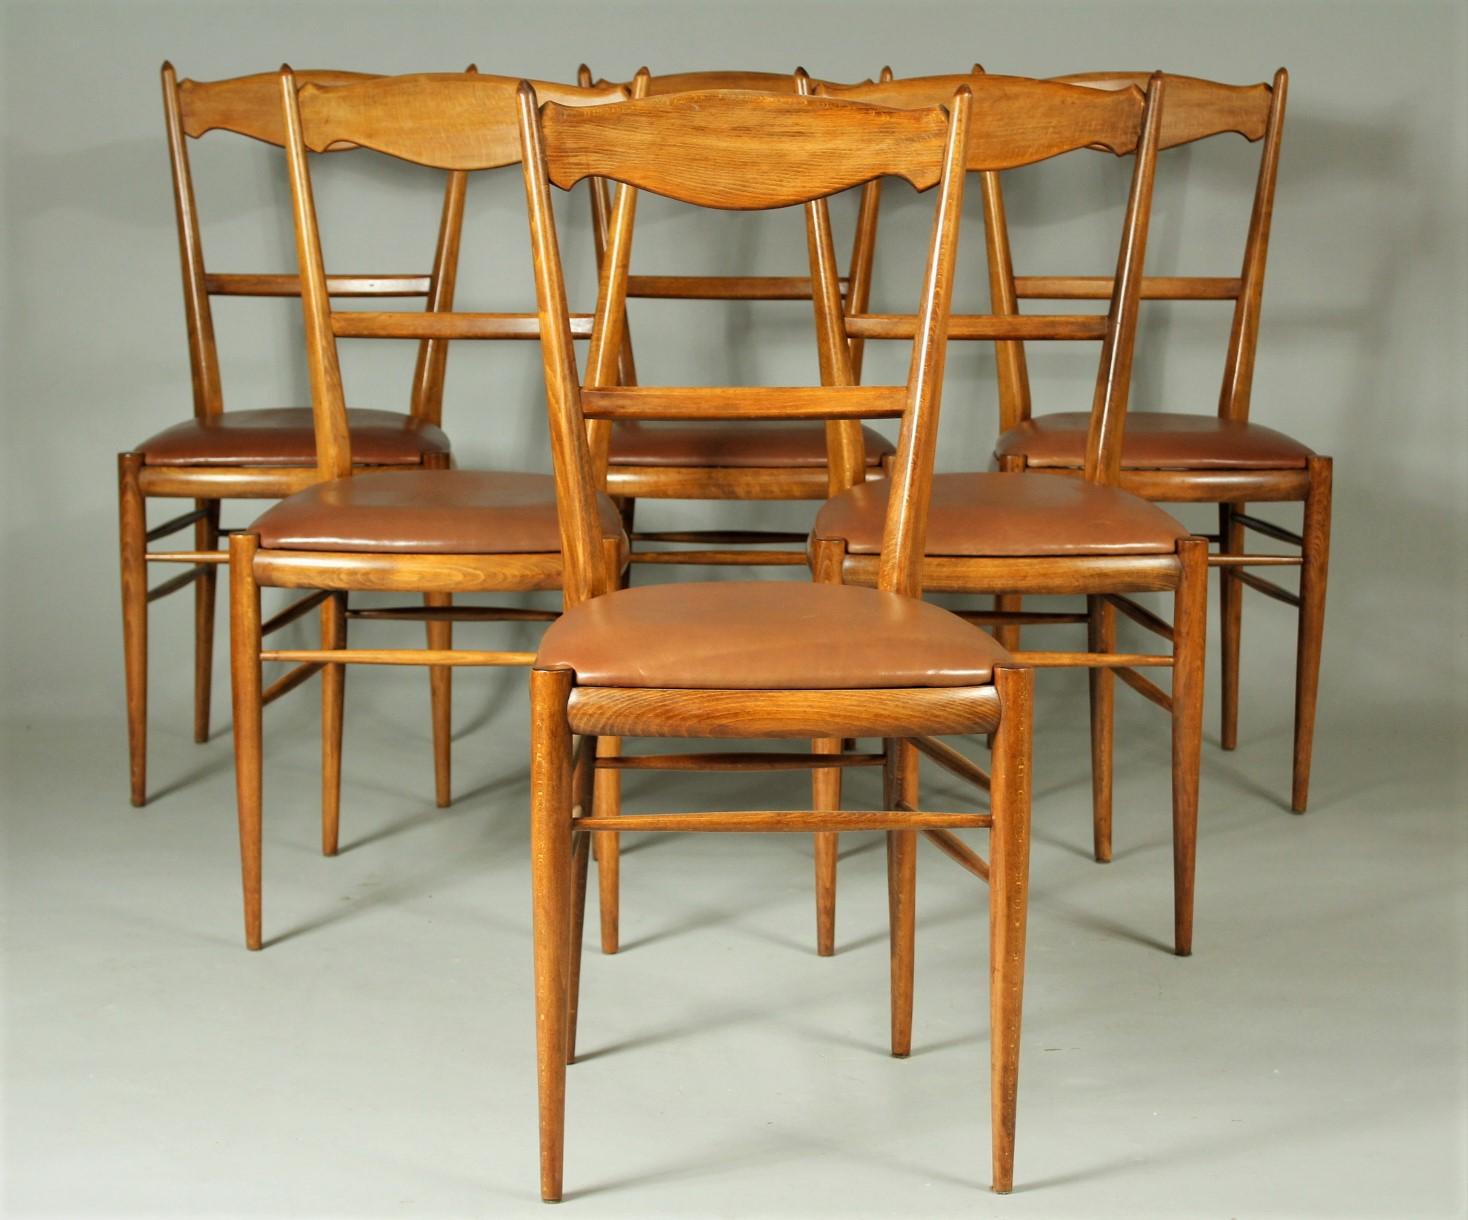 Set of six beech dining chairs from the 1970s. They are upholstered in natural cow leather. These chairs are in very good condition, they have been restored.